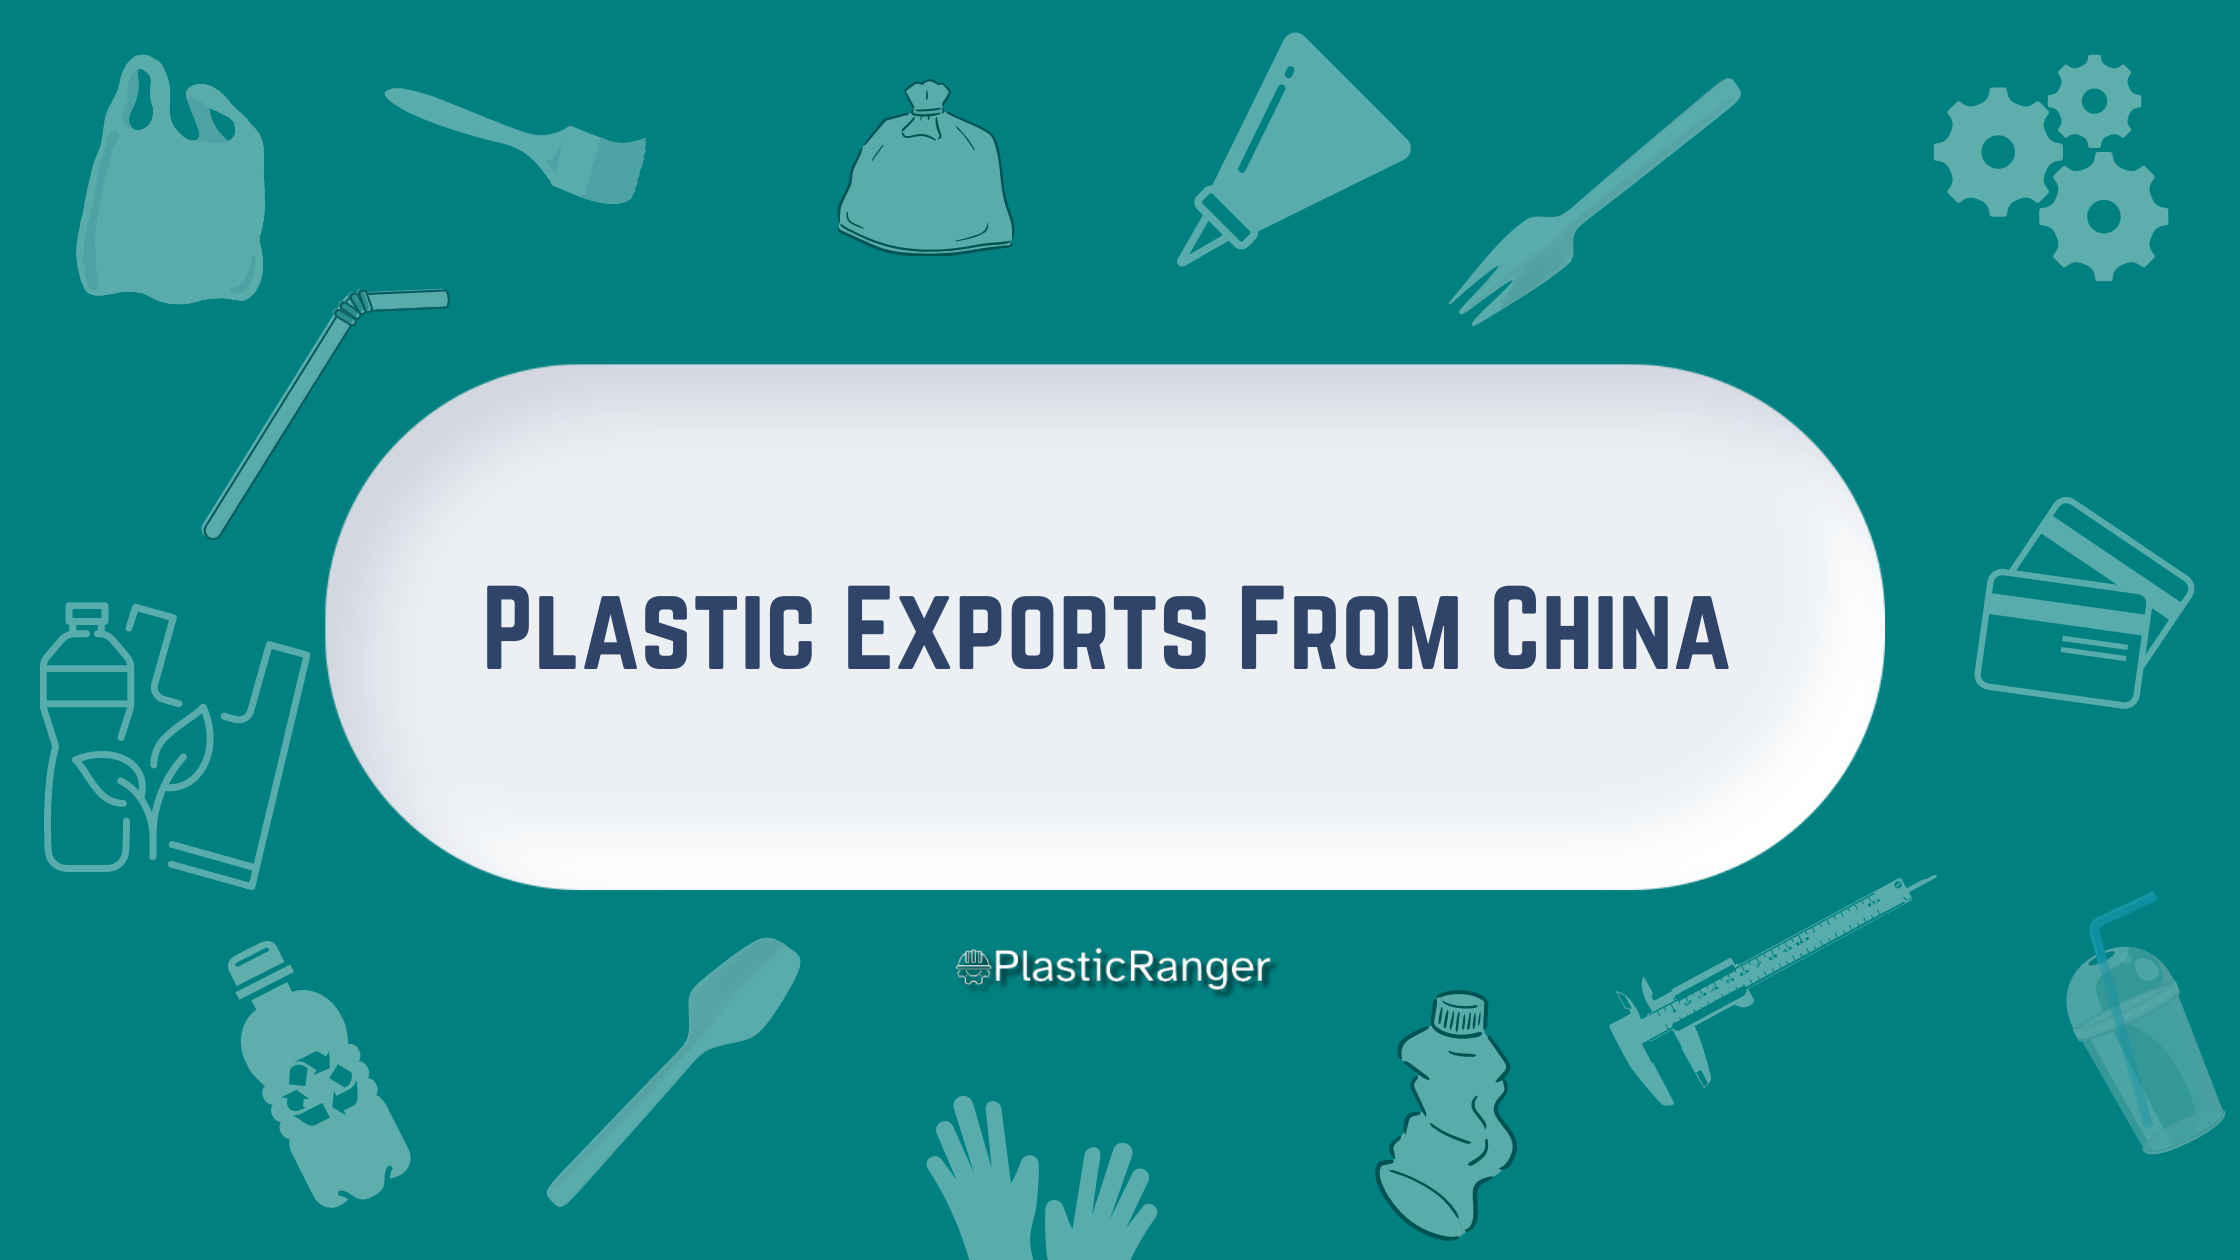 PLASTIC EXPORTS FROM CHINA